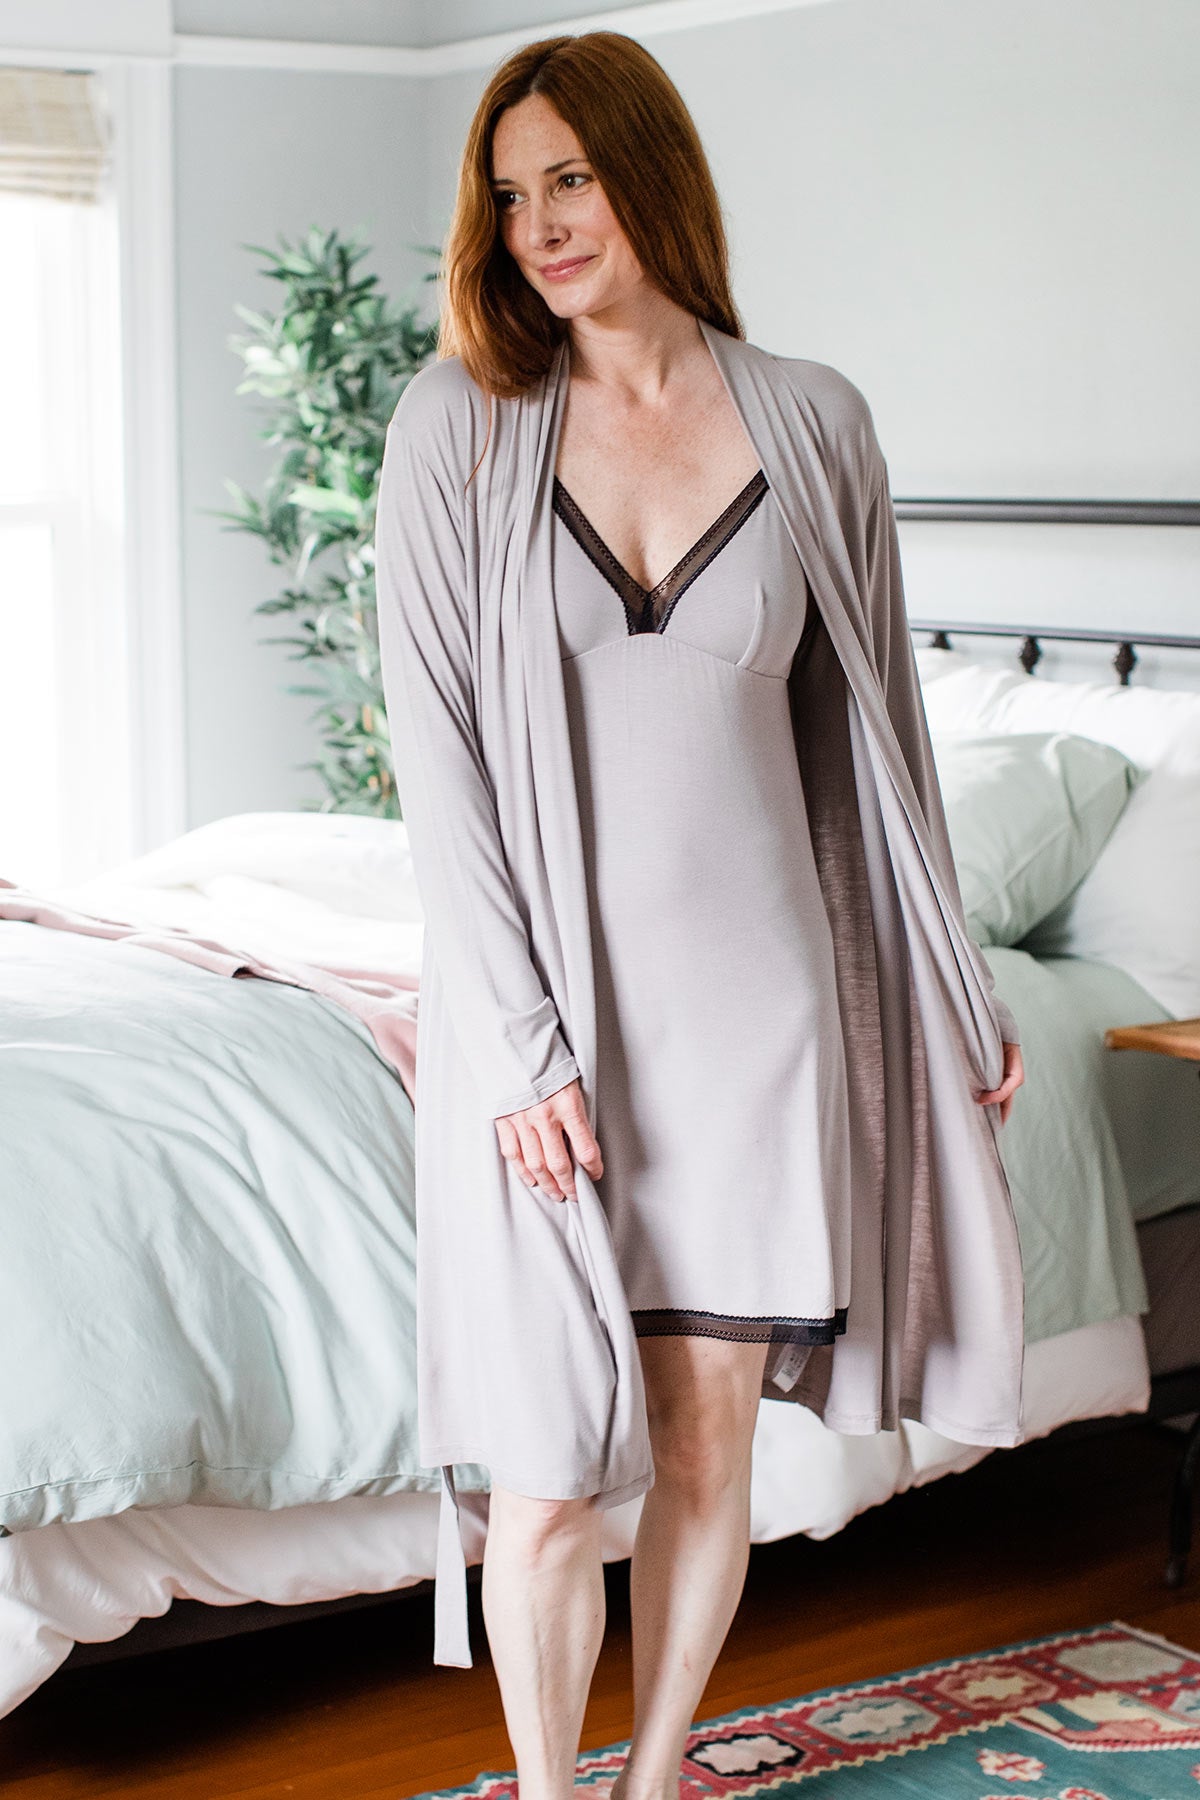 A woman standing and smiling while looking to the side, wearing Yala Iris Lace Bamboo Nightgown in Ash